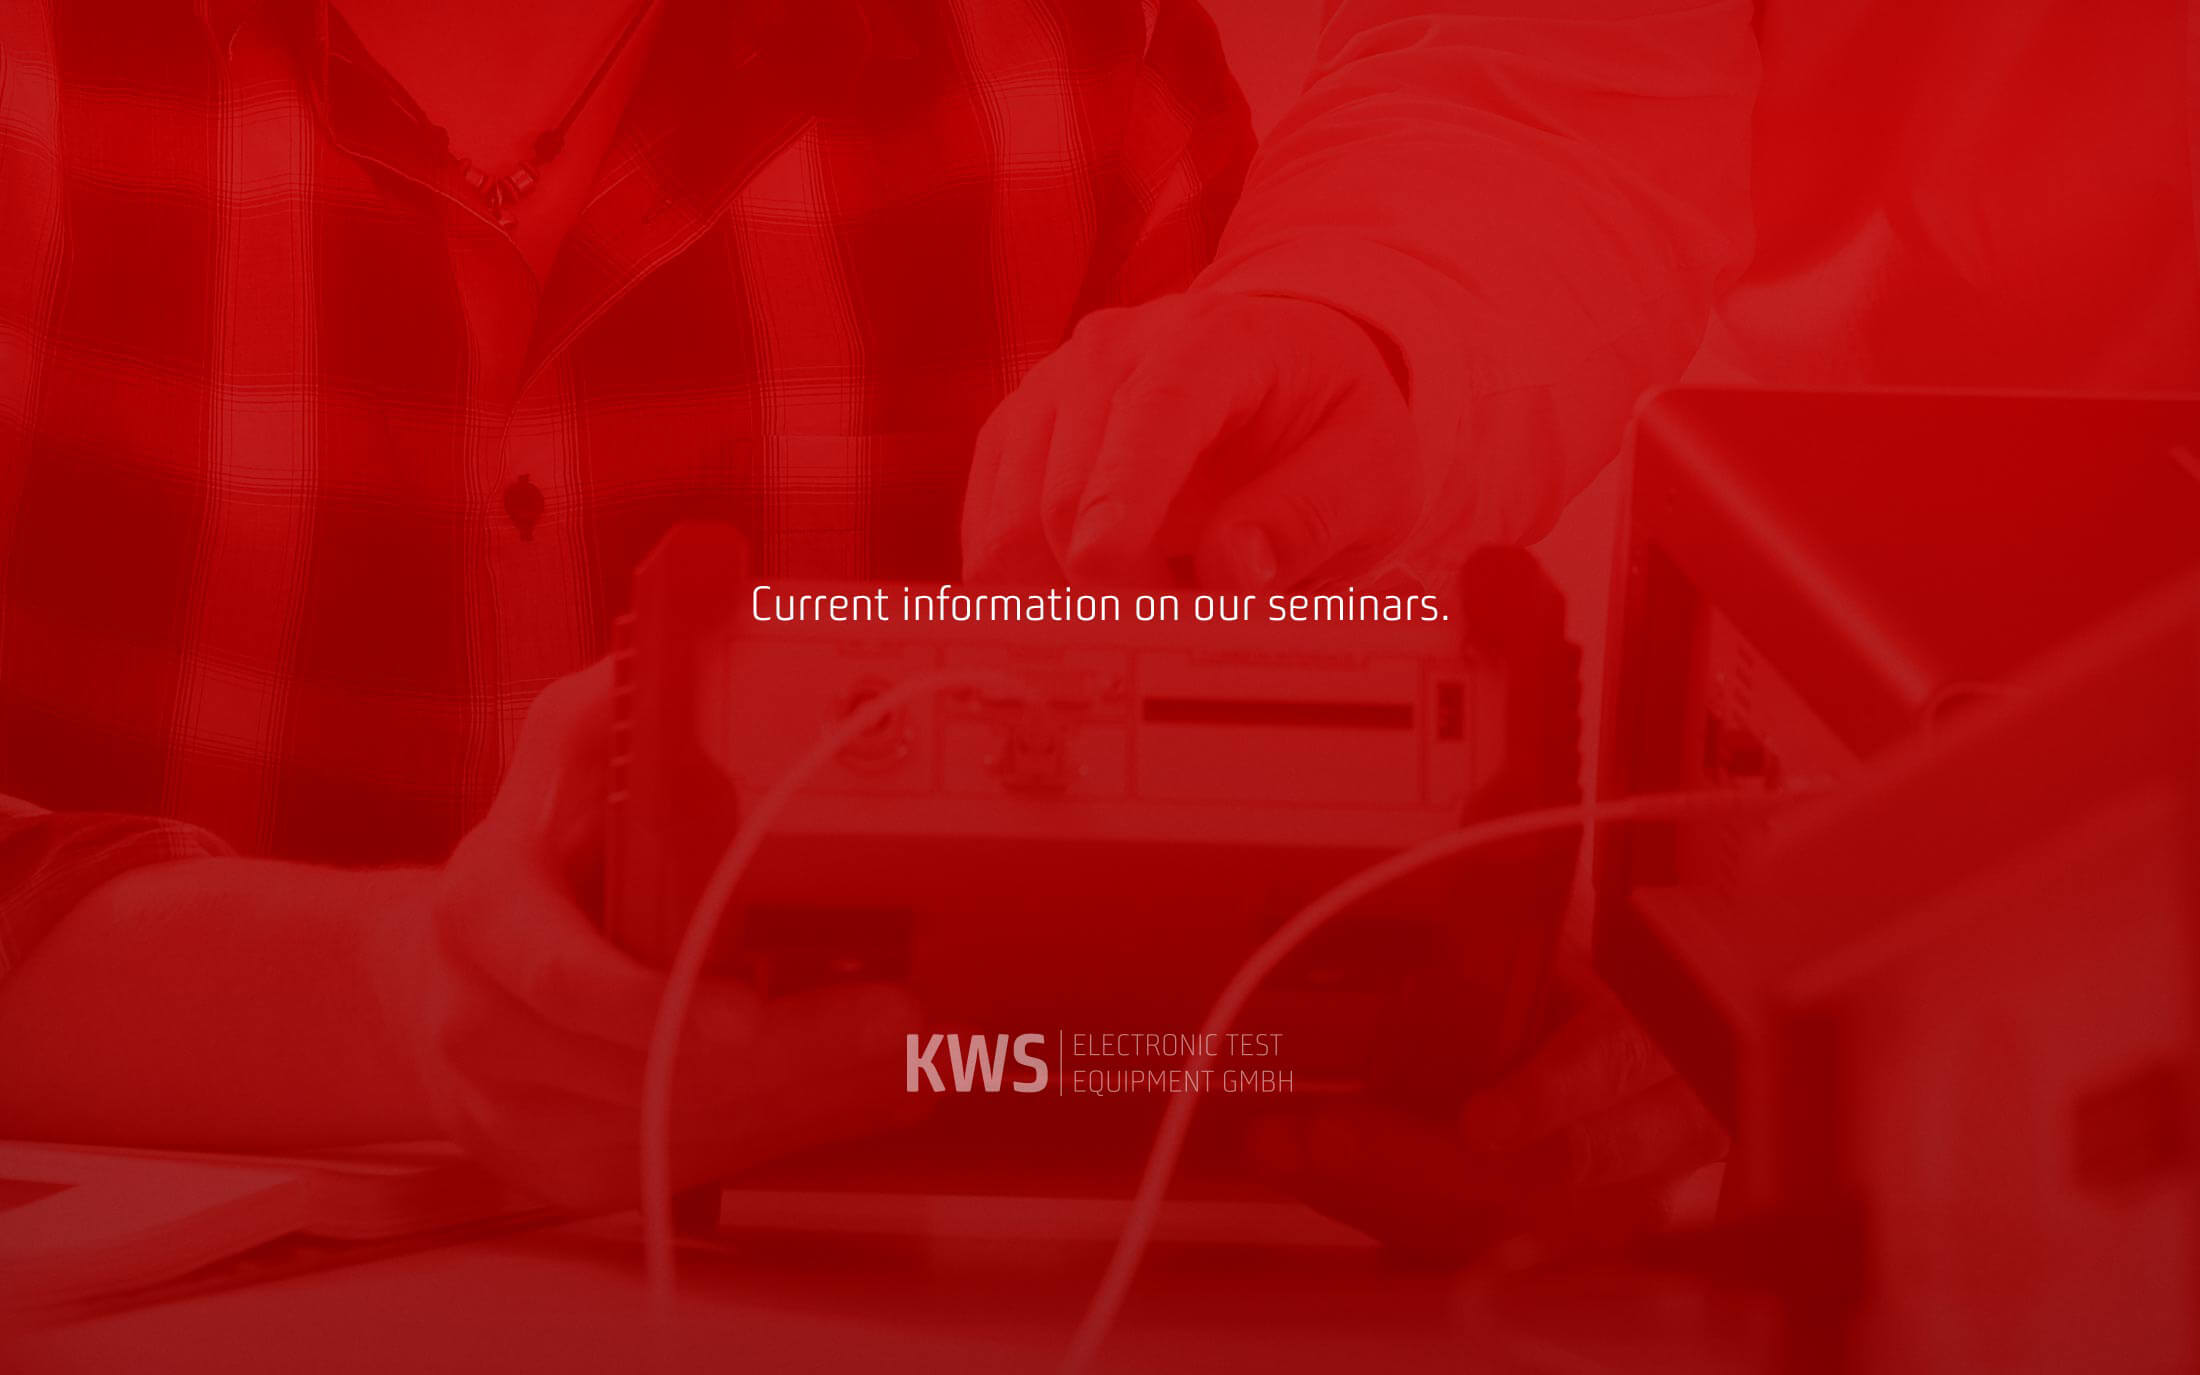 KWS Electronic News 2020: Current information on our seminars